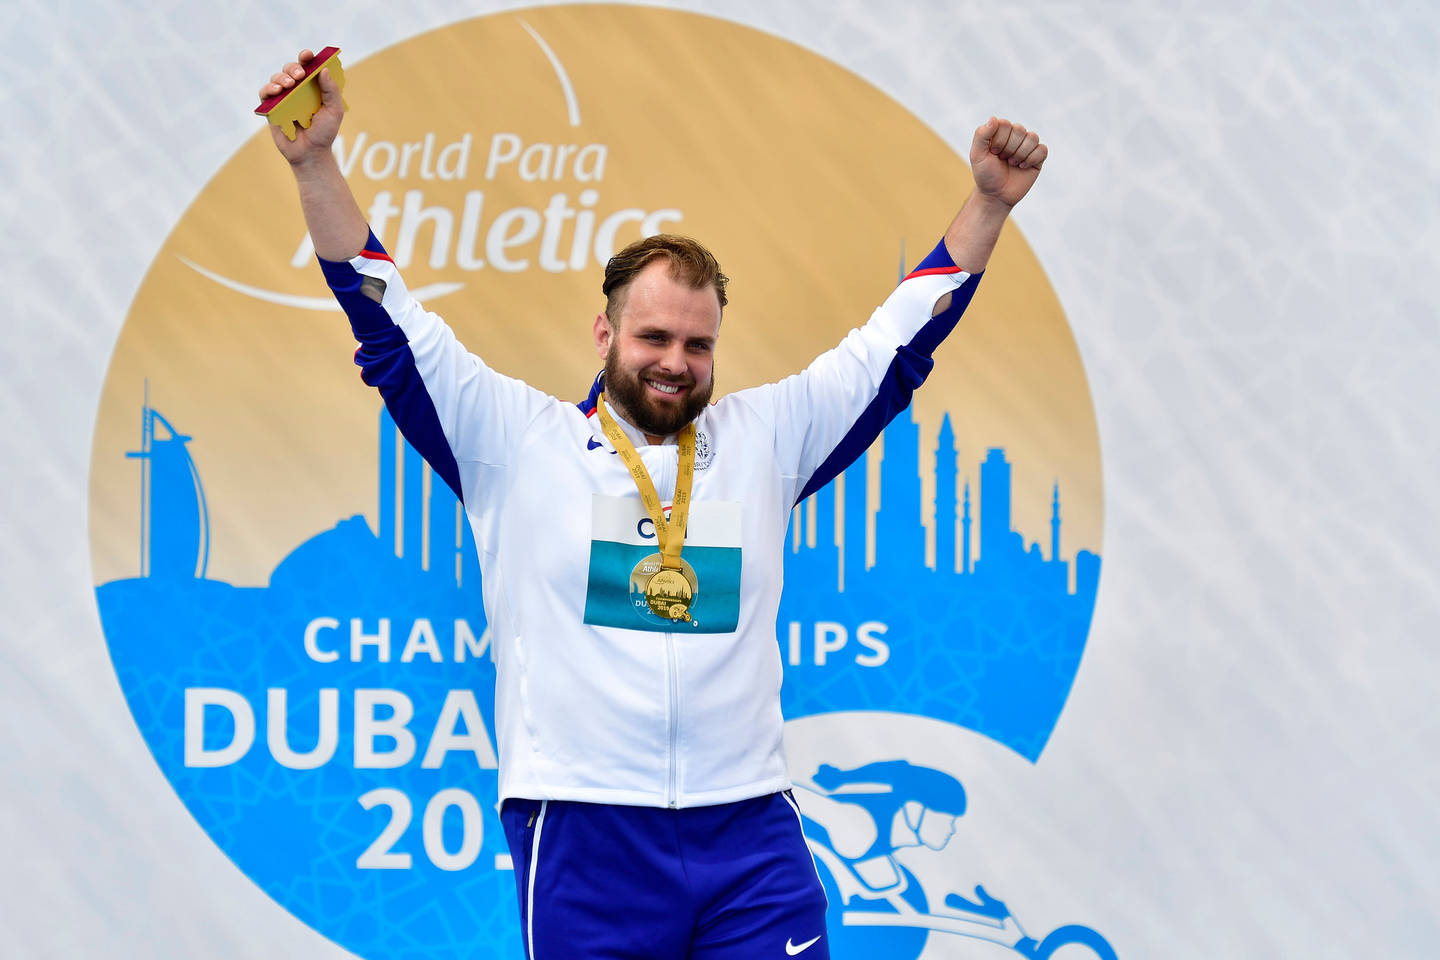 Aled Davies on the podium after winning gold at the Worlds 2019